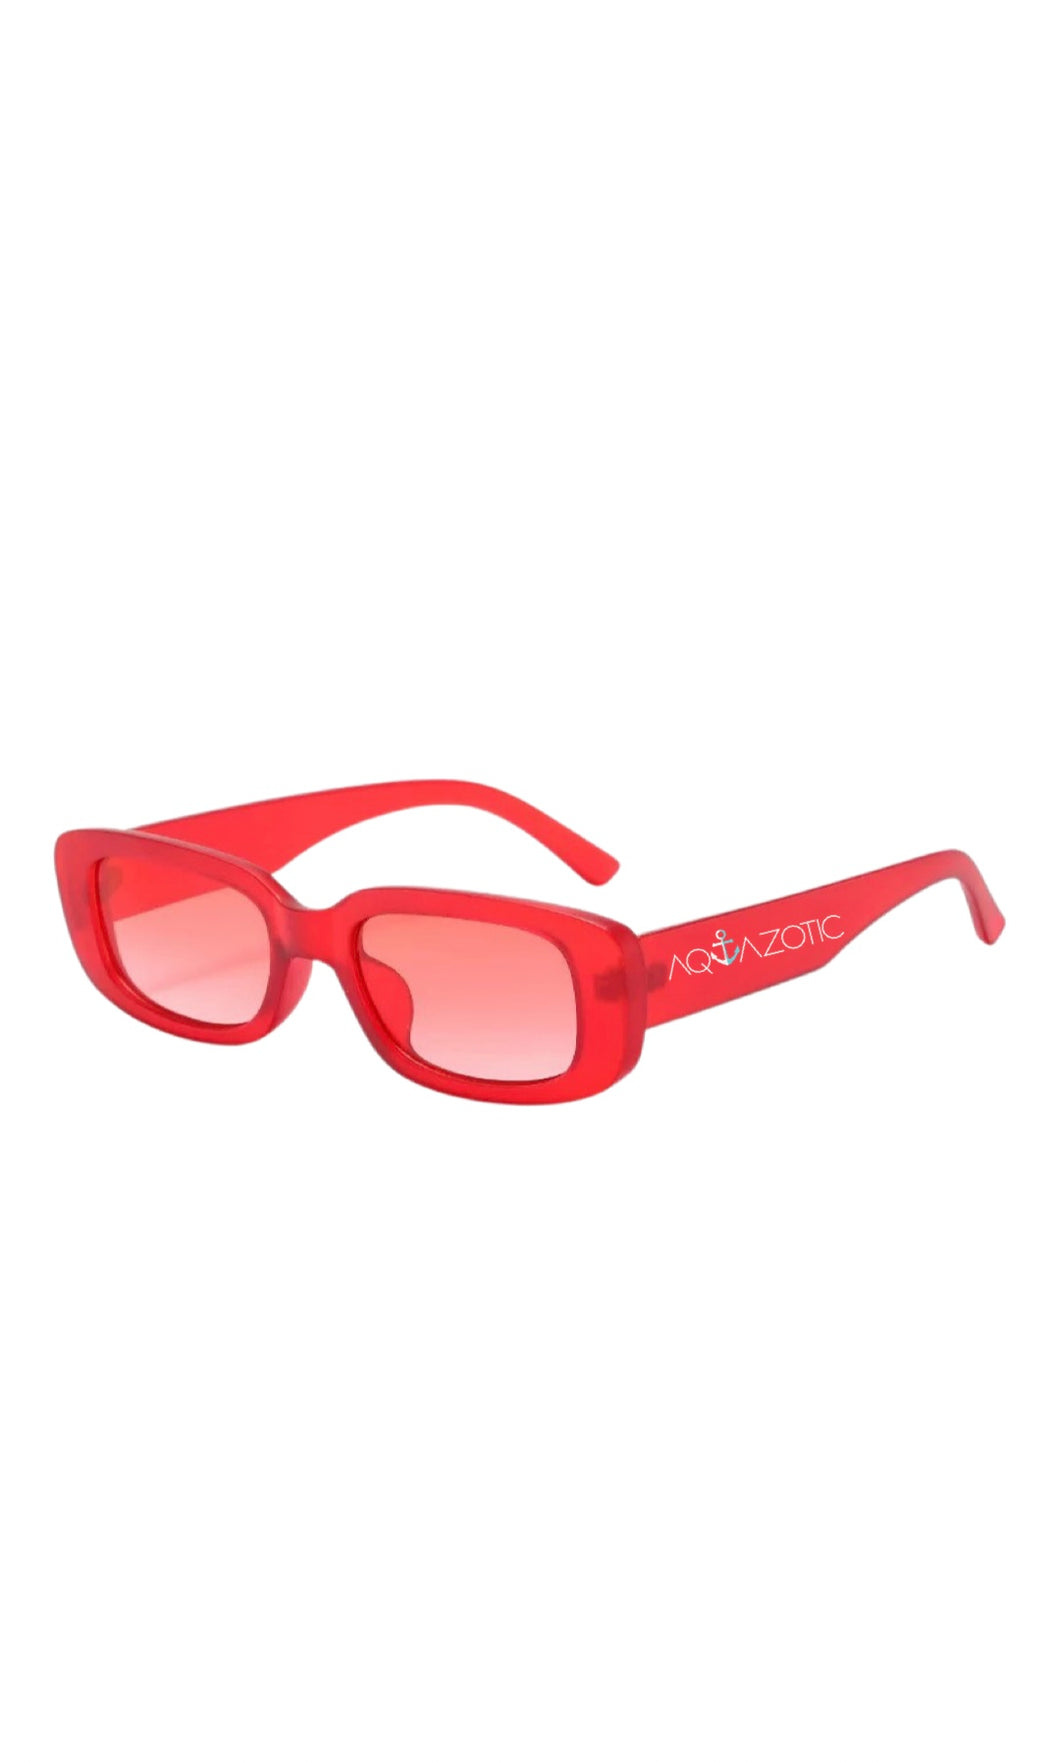 Tech-house sunglasses red